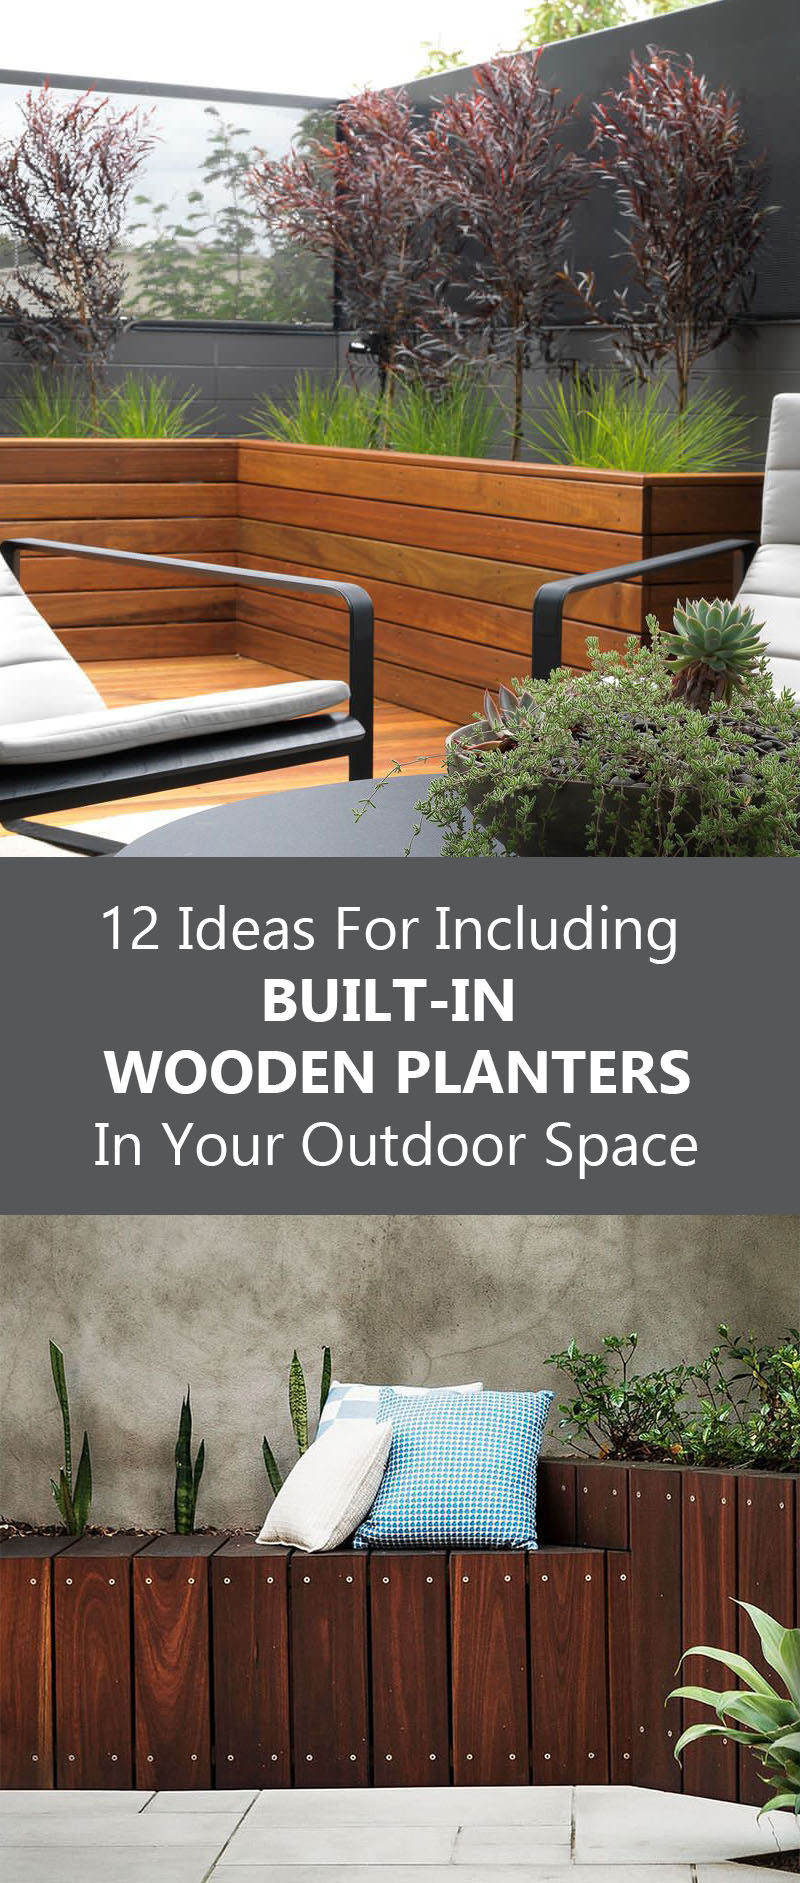 12 Ideas For Including Built-In Wooden Planters In Your Outdoor Space